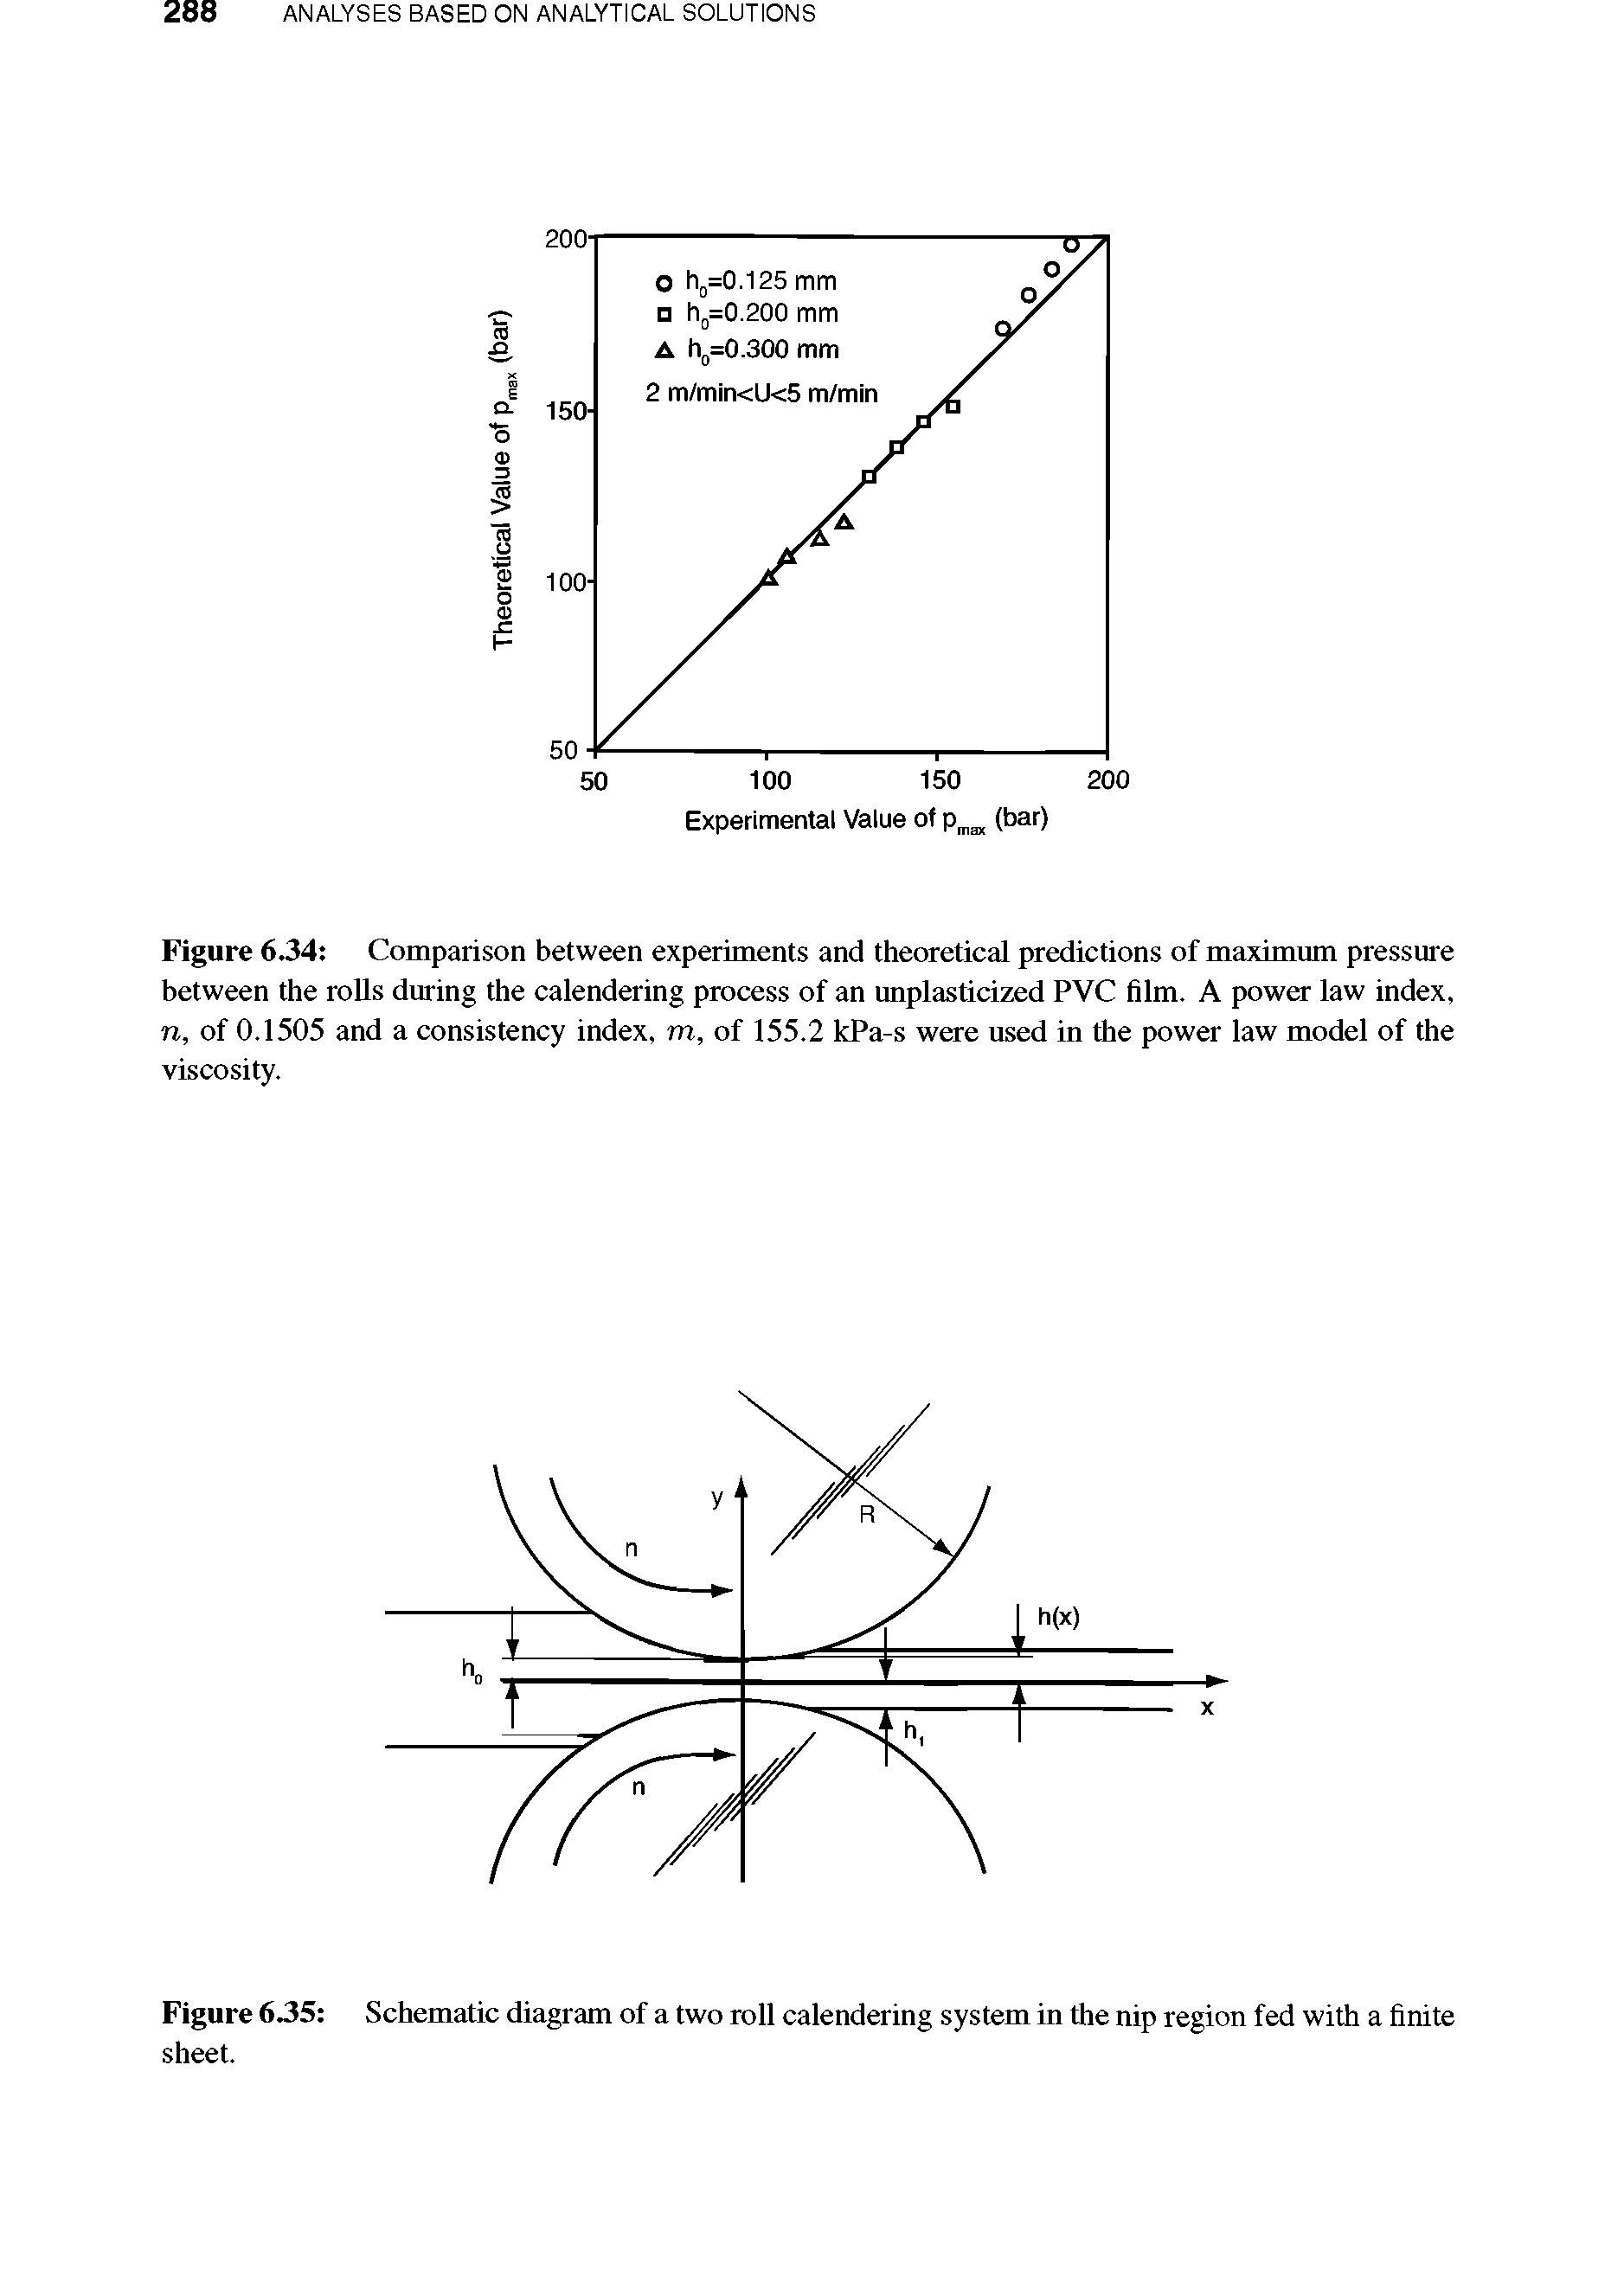 Figure 6.34 Comparison between experiments and theoretical predictions of maximum pressure between the rolls during the calendering process of an unplasticized PVC film. A power law index, n, of 0.1505 and a consistency index, m, of 155.2 kPa-s were used in the power law model of the viscosity.